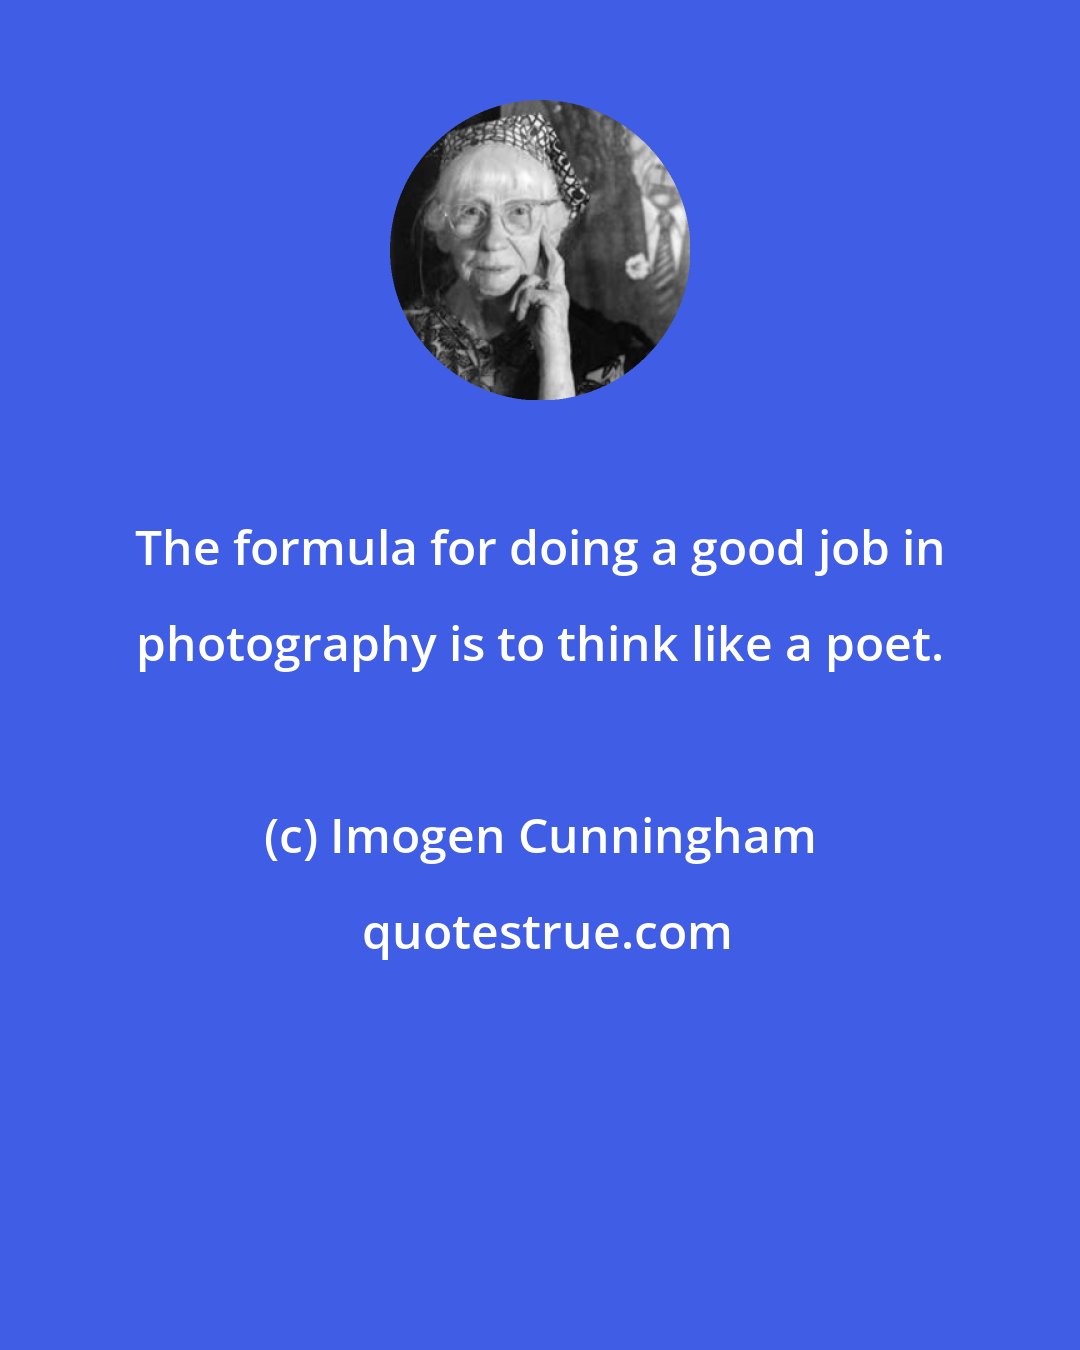 Imogen Cunningham: The formula for doing a good job in photography is to think like a poet.